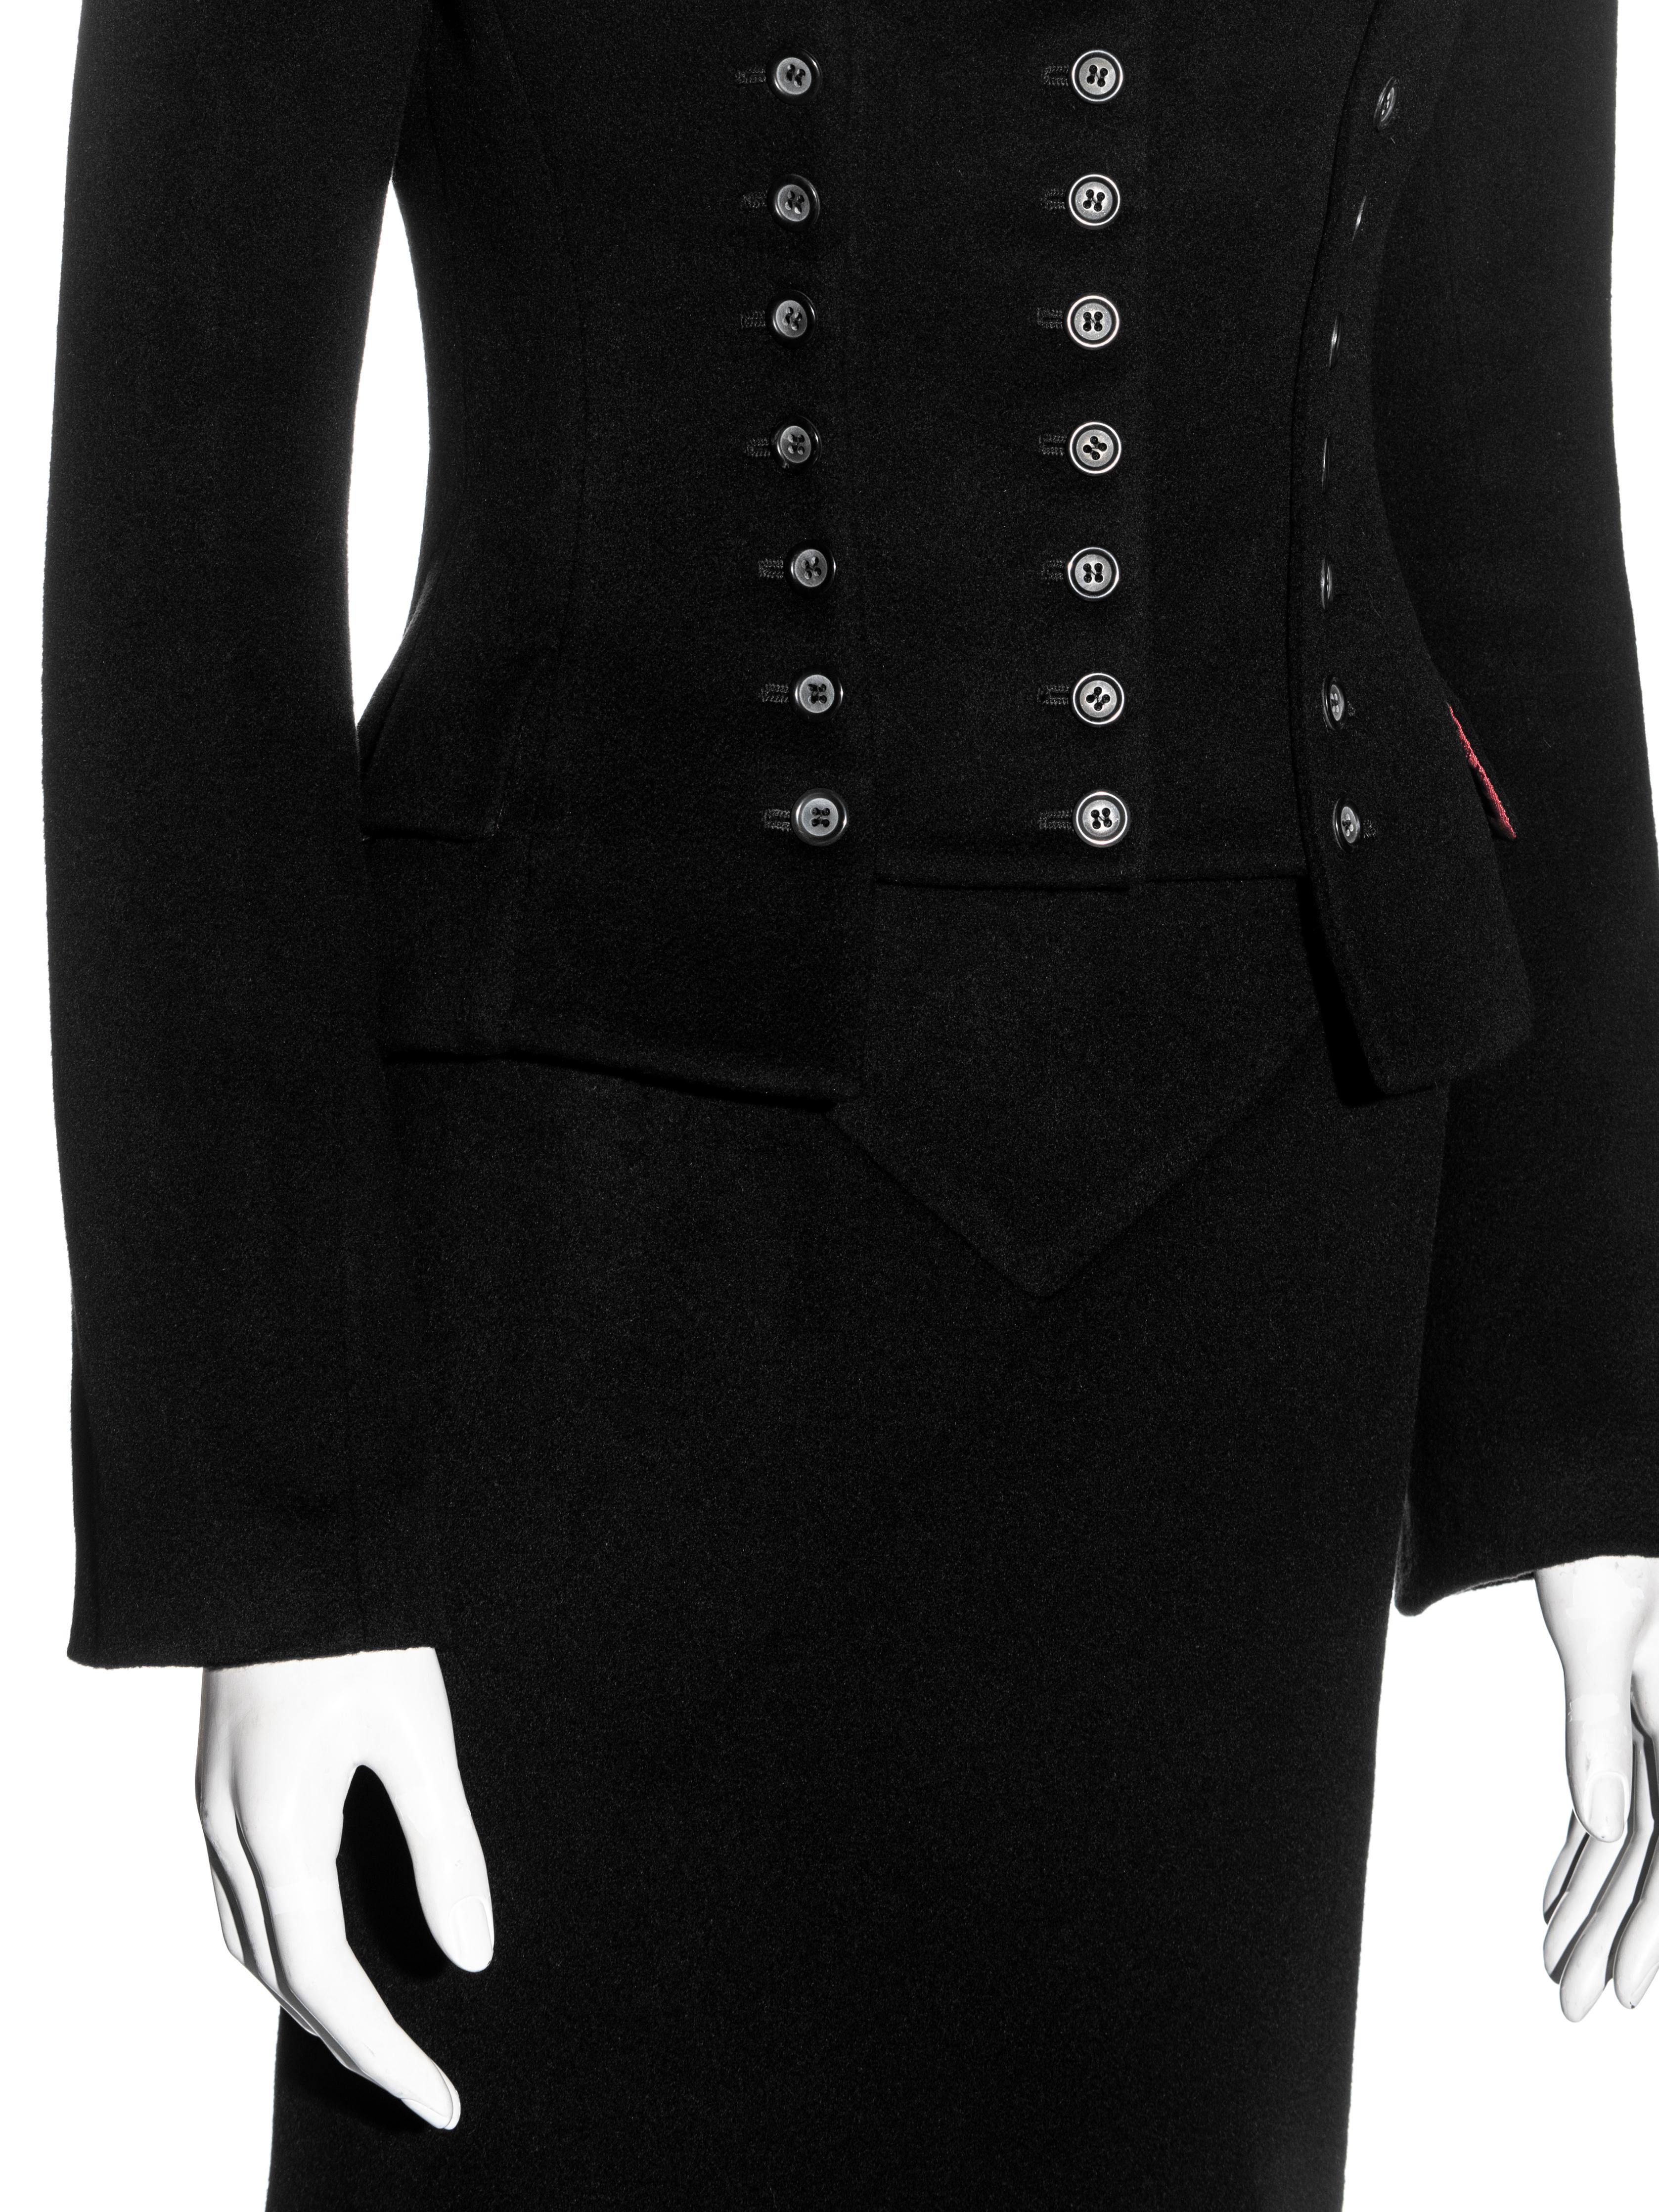 Alexander McQueen black cashmere 'Joan' jacket and skirt suit, fw 1998 For Sale 3